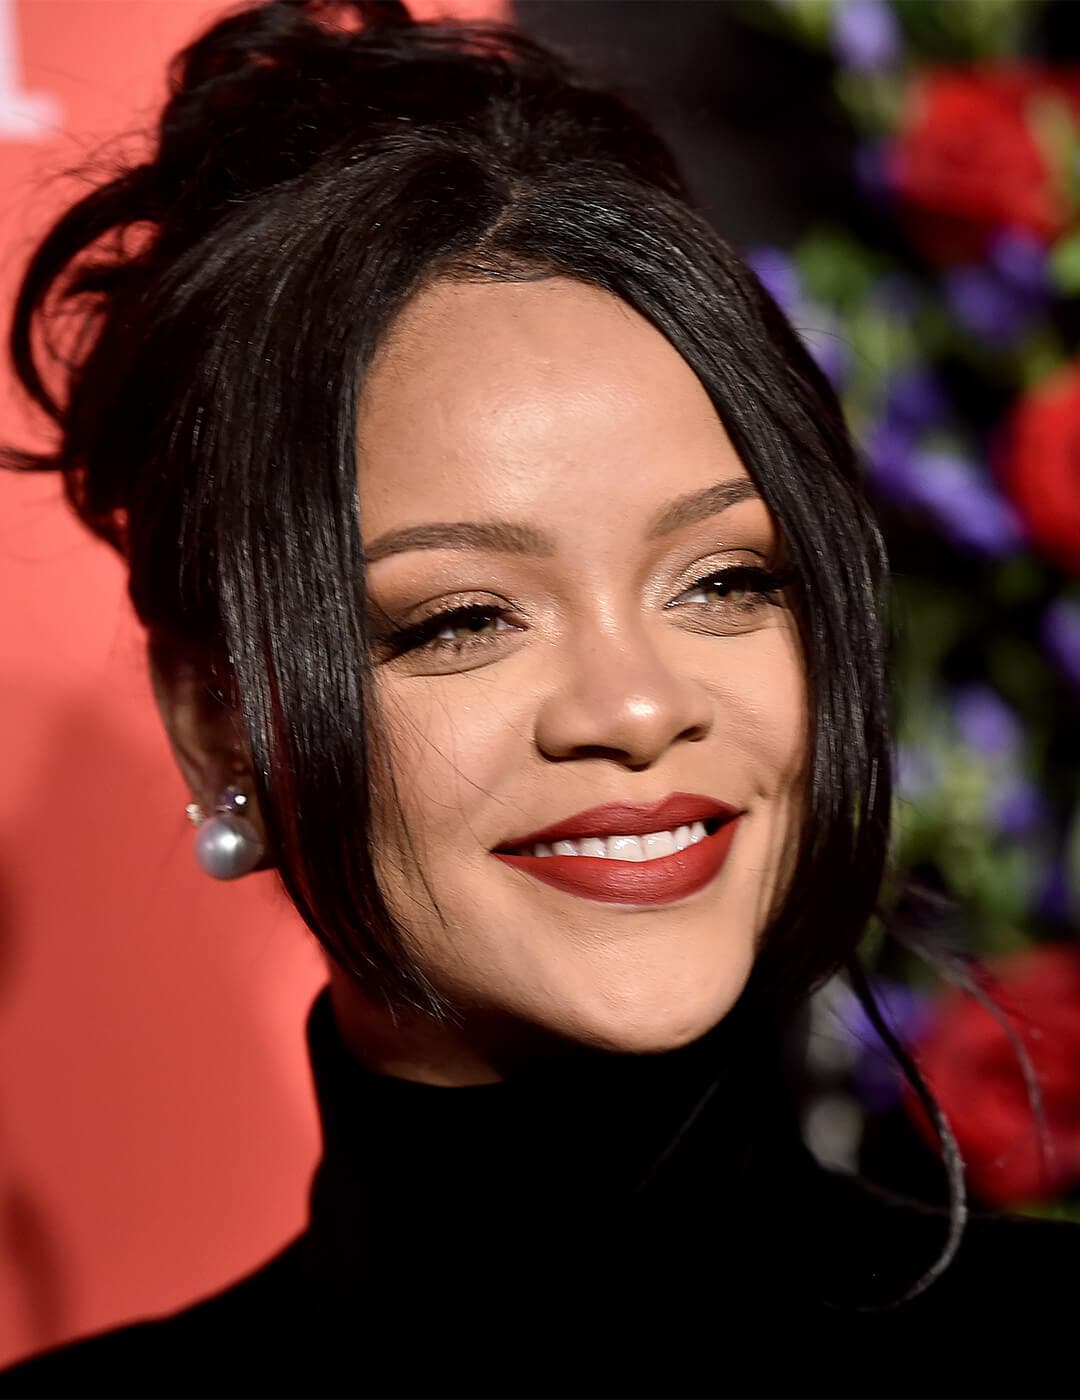 Rihanna rocking a '90s-themed messy bun hairstyle and black turtleneck top at the red carpet